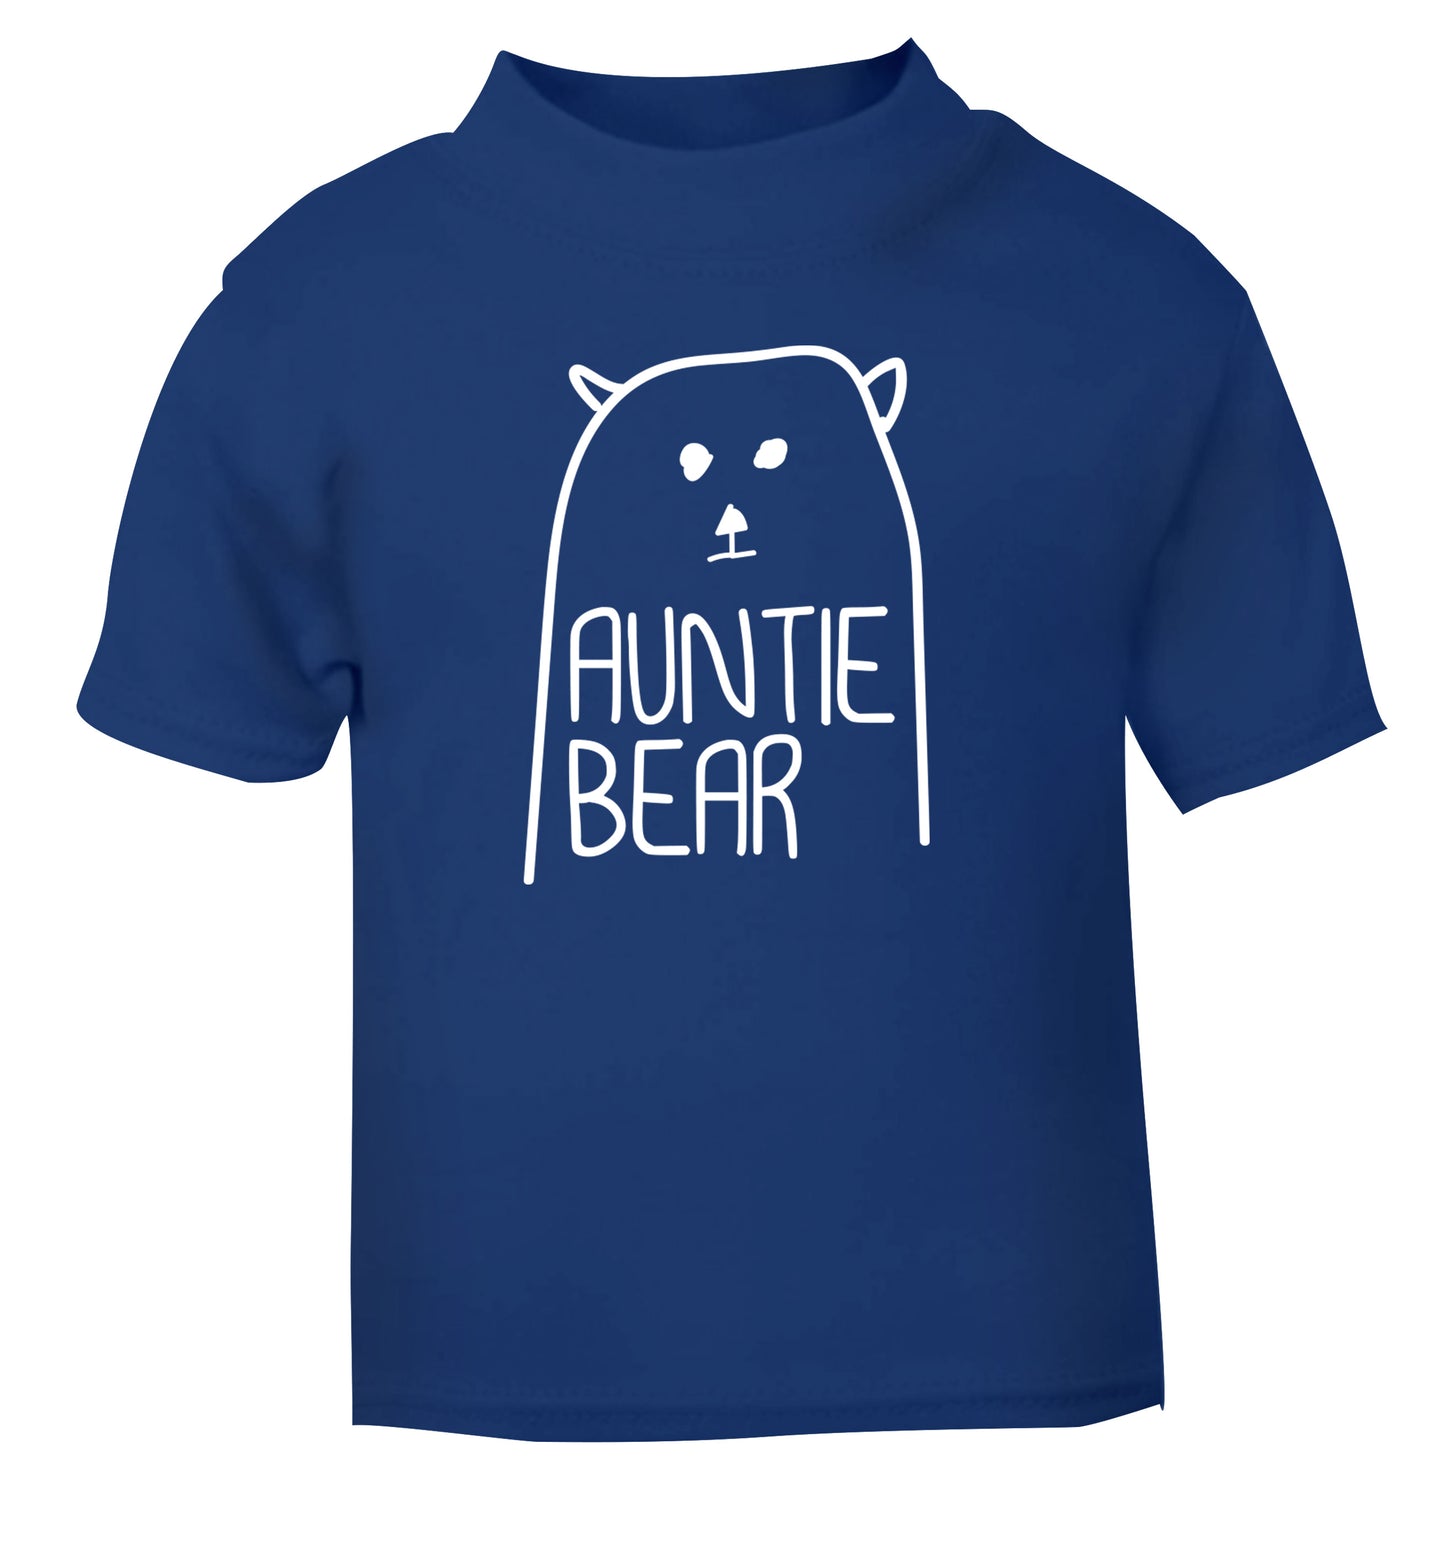 Auntie bear blue Baby Toddler Tshirt 2 Years